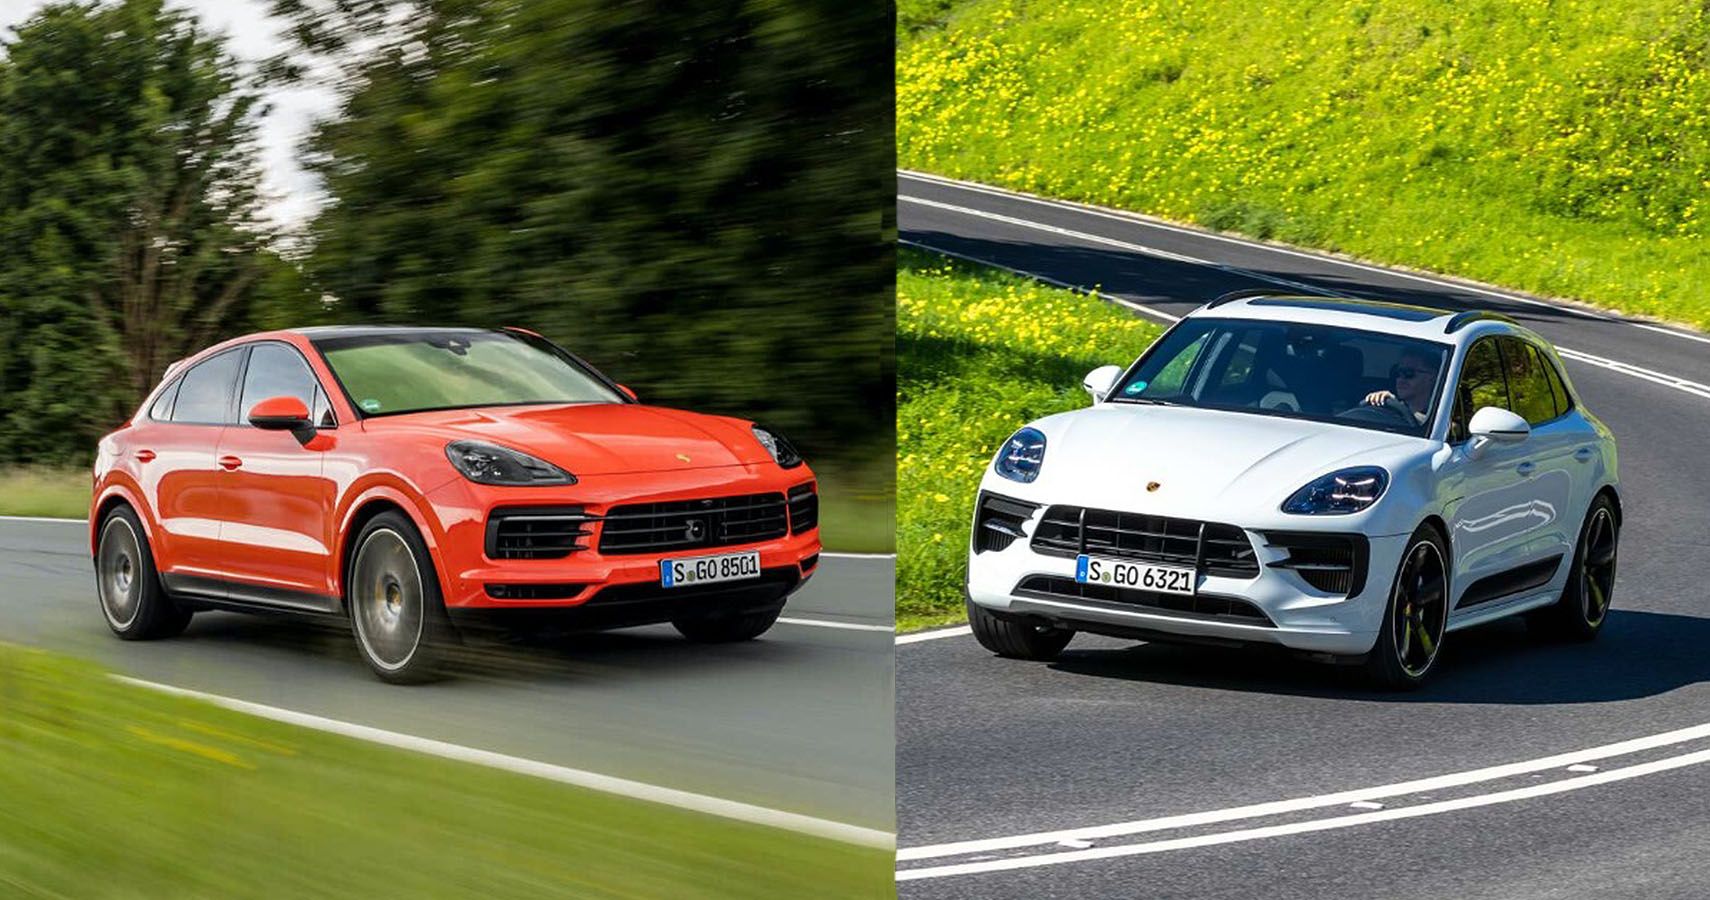 Porsche Macan Vs Cayenne Here's Which SUV Is Right For You